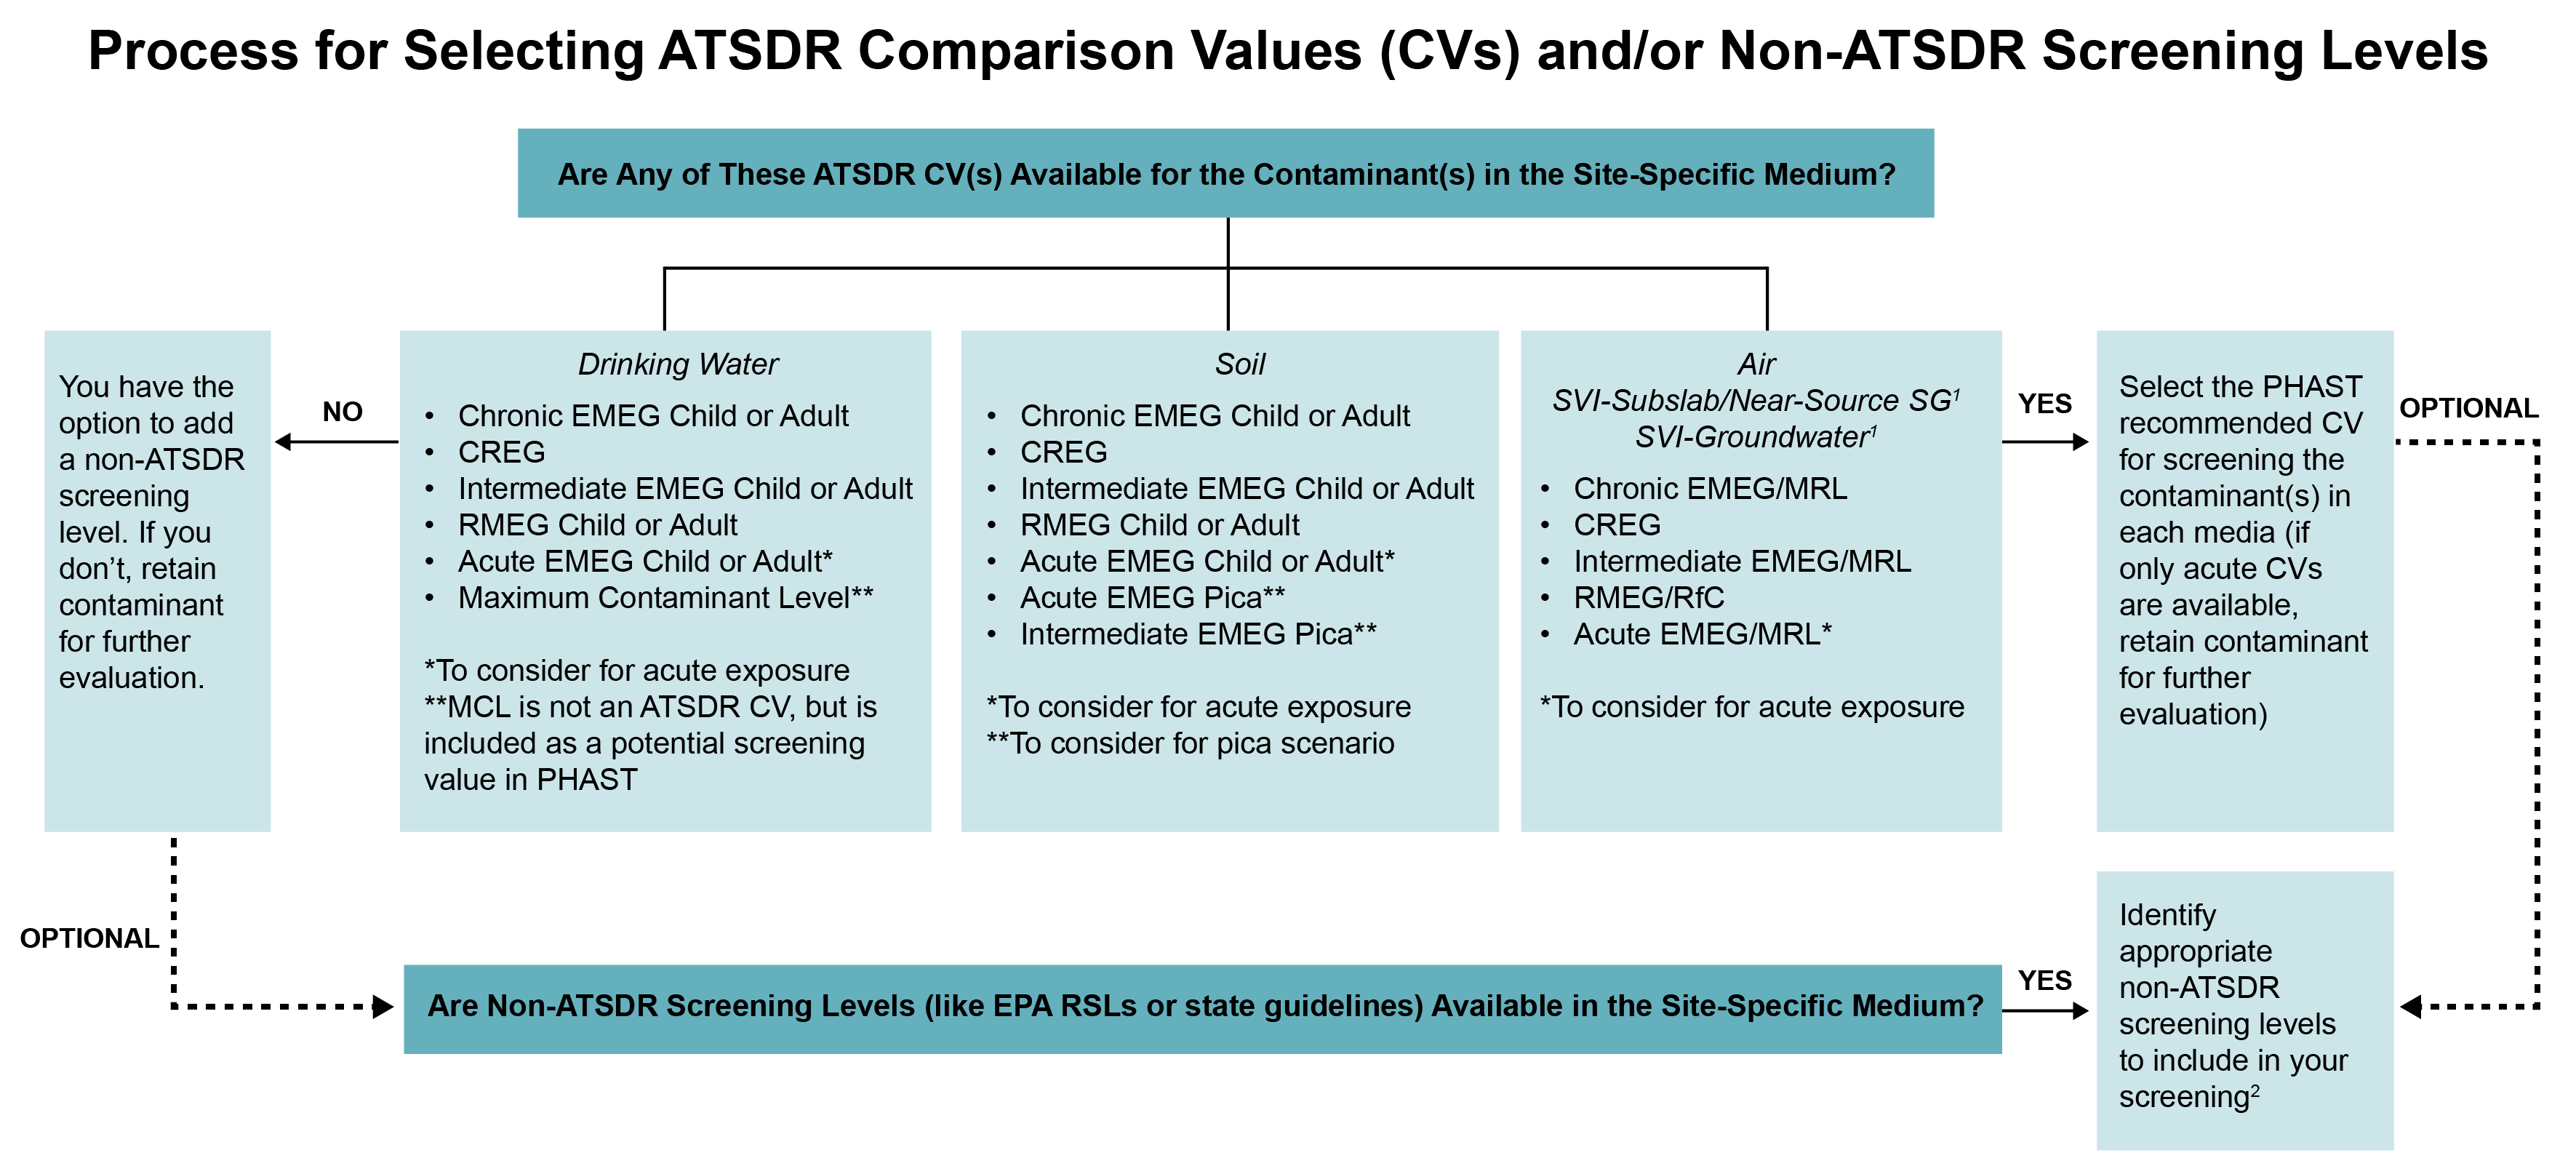 Diagram of the process for Selecting ATSDR Comparison Values and or Non ATSDTR Screening Levels